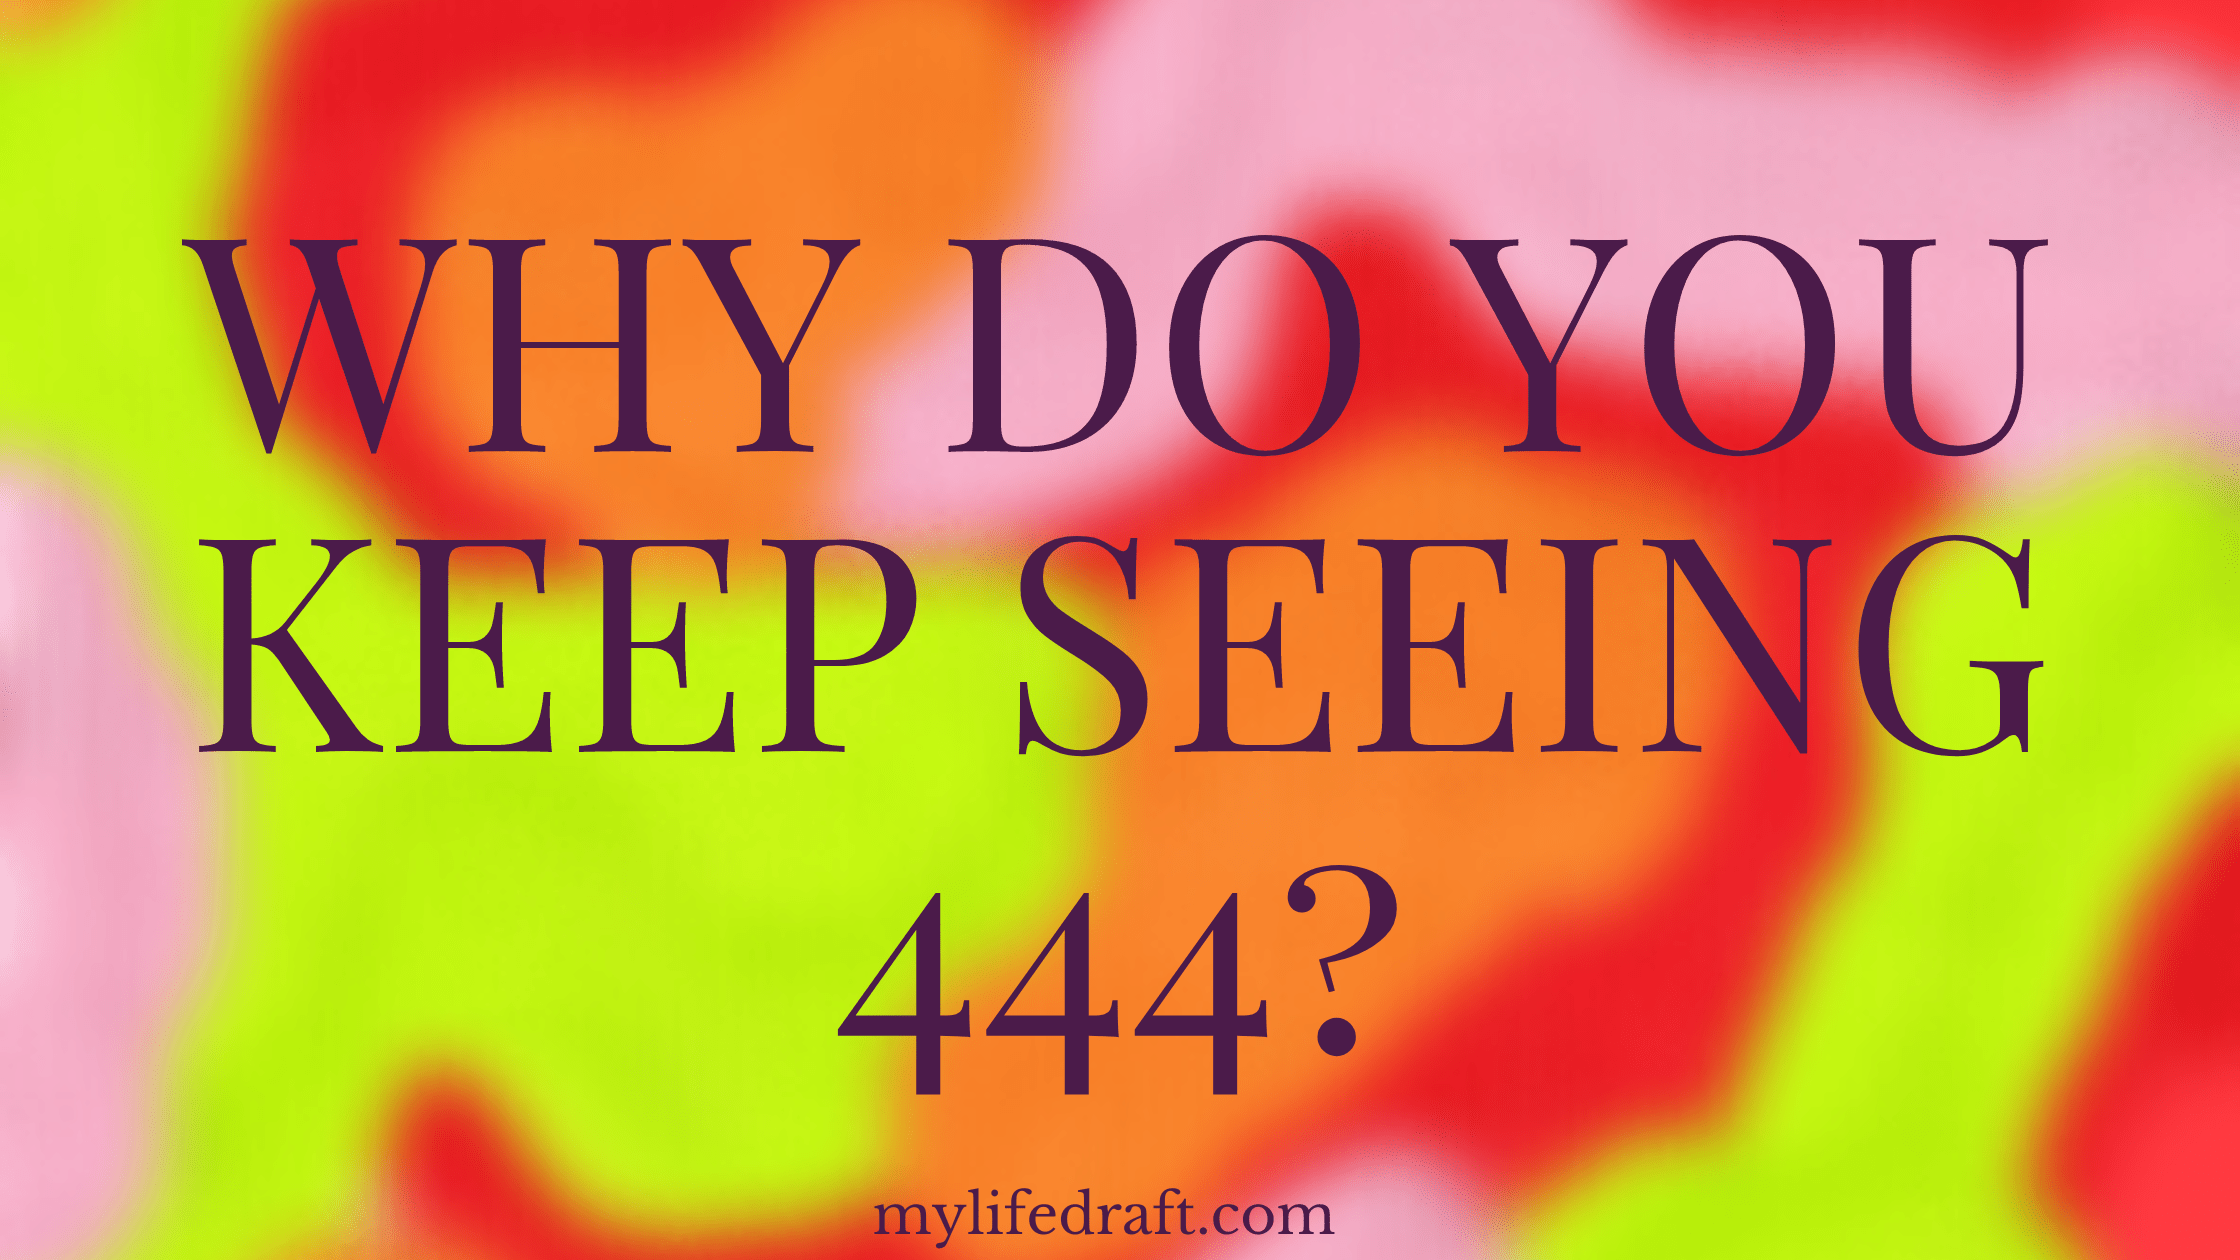 Why Do You Keep Seeing 444?